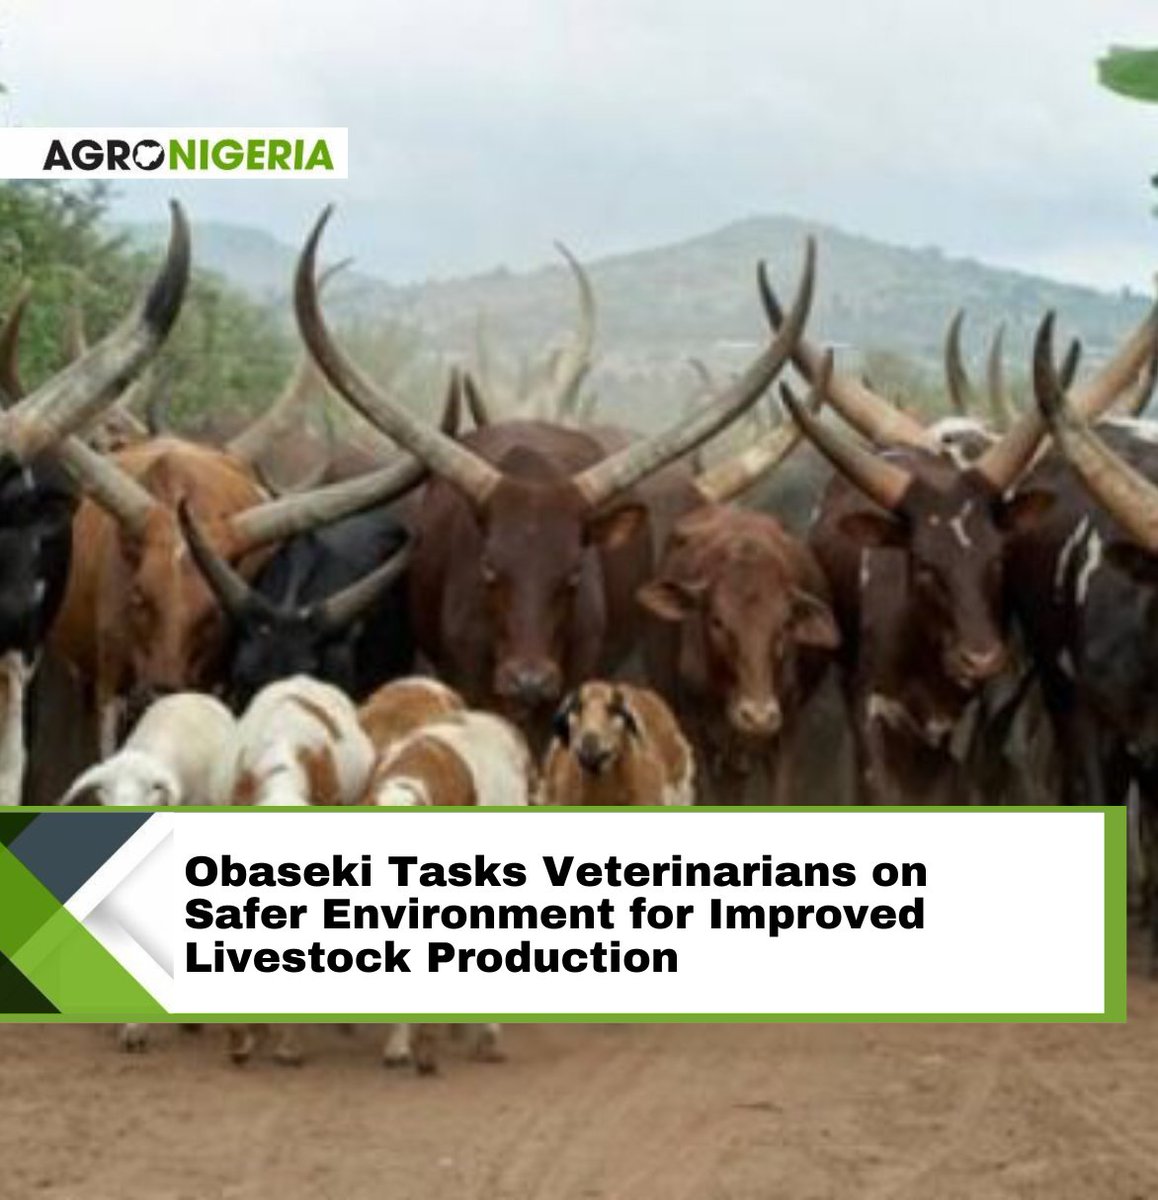 Governor Godwin Obaseki of Edo State has lauded the efforts of the state chapter of the Nigerian Veterinary Medical Association (NVMA), and tasked them on promoting a cleaner, hygienic, and safer environment for improved livestock production. Read more: agronigeria.ng/obaseki-tasks-…